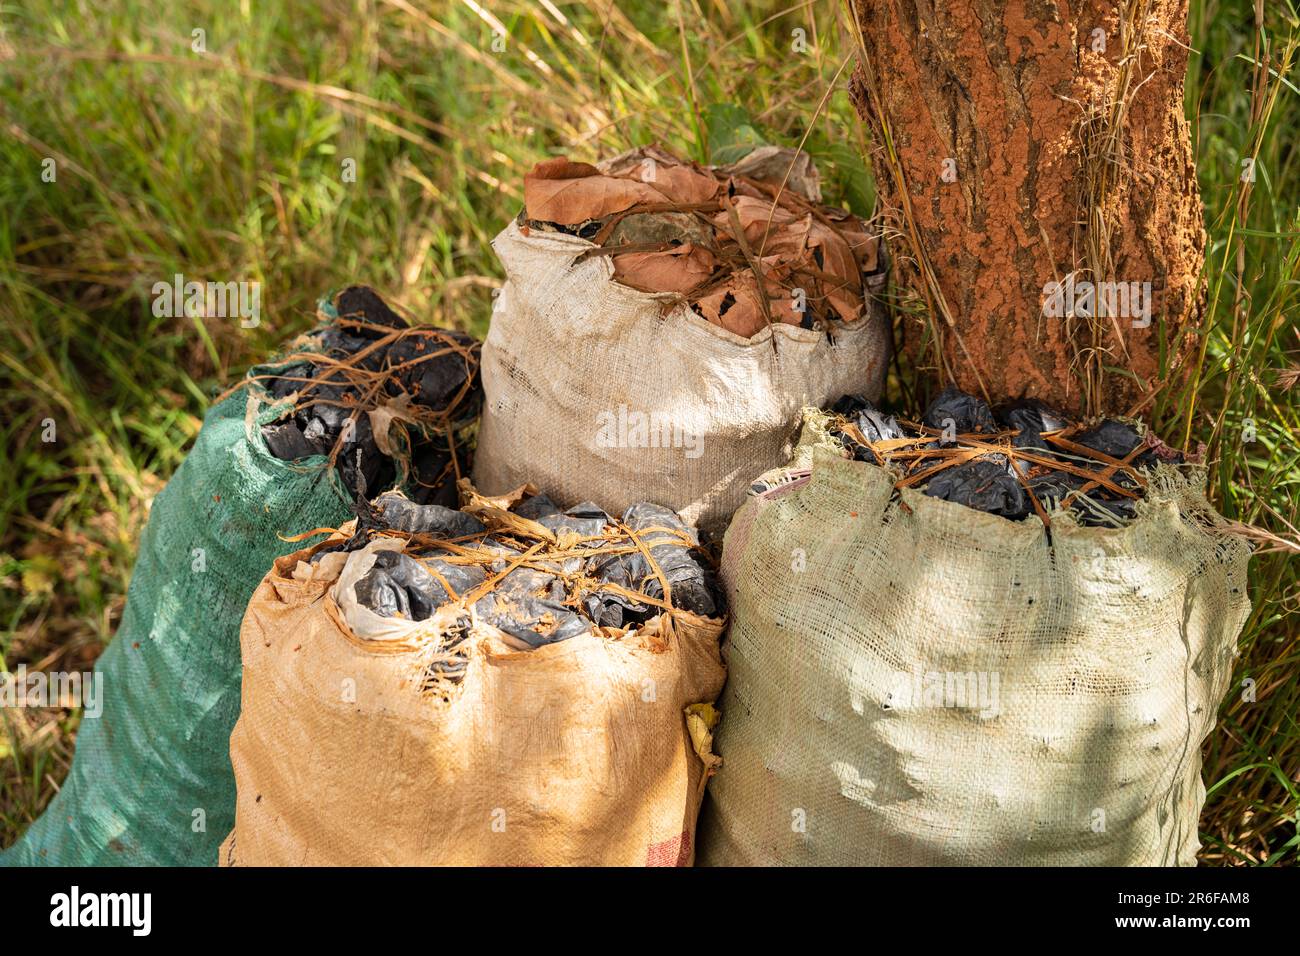 Several sacks of illegally produced charcoal in rural Malawi - a driver of deforestation Stock Photo